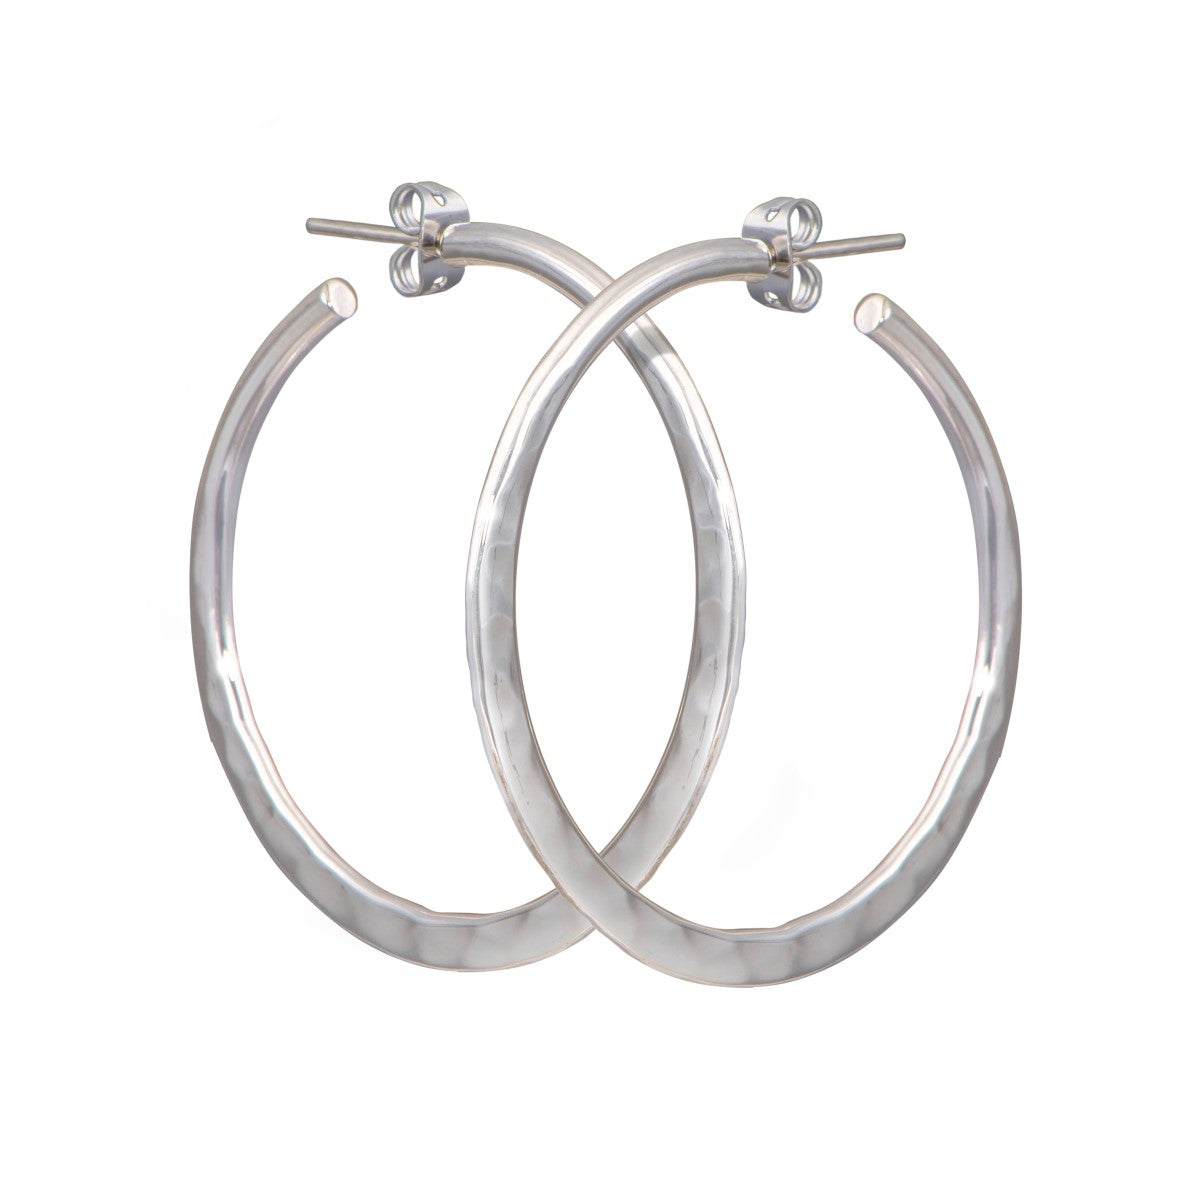 Statement Sterling Silver Hoop Earrings with a Hammered Finish